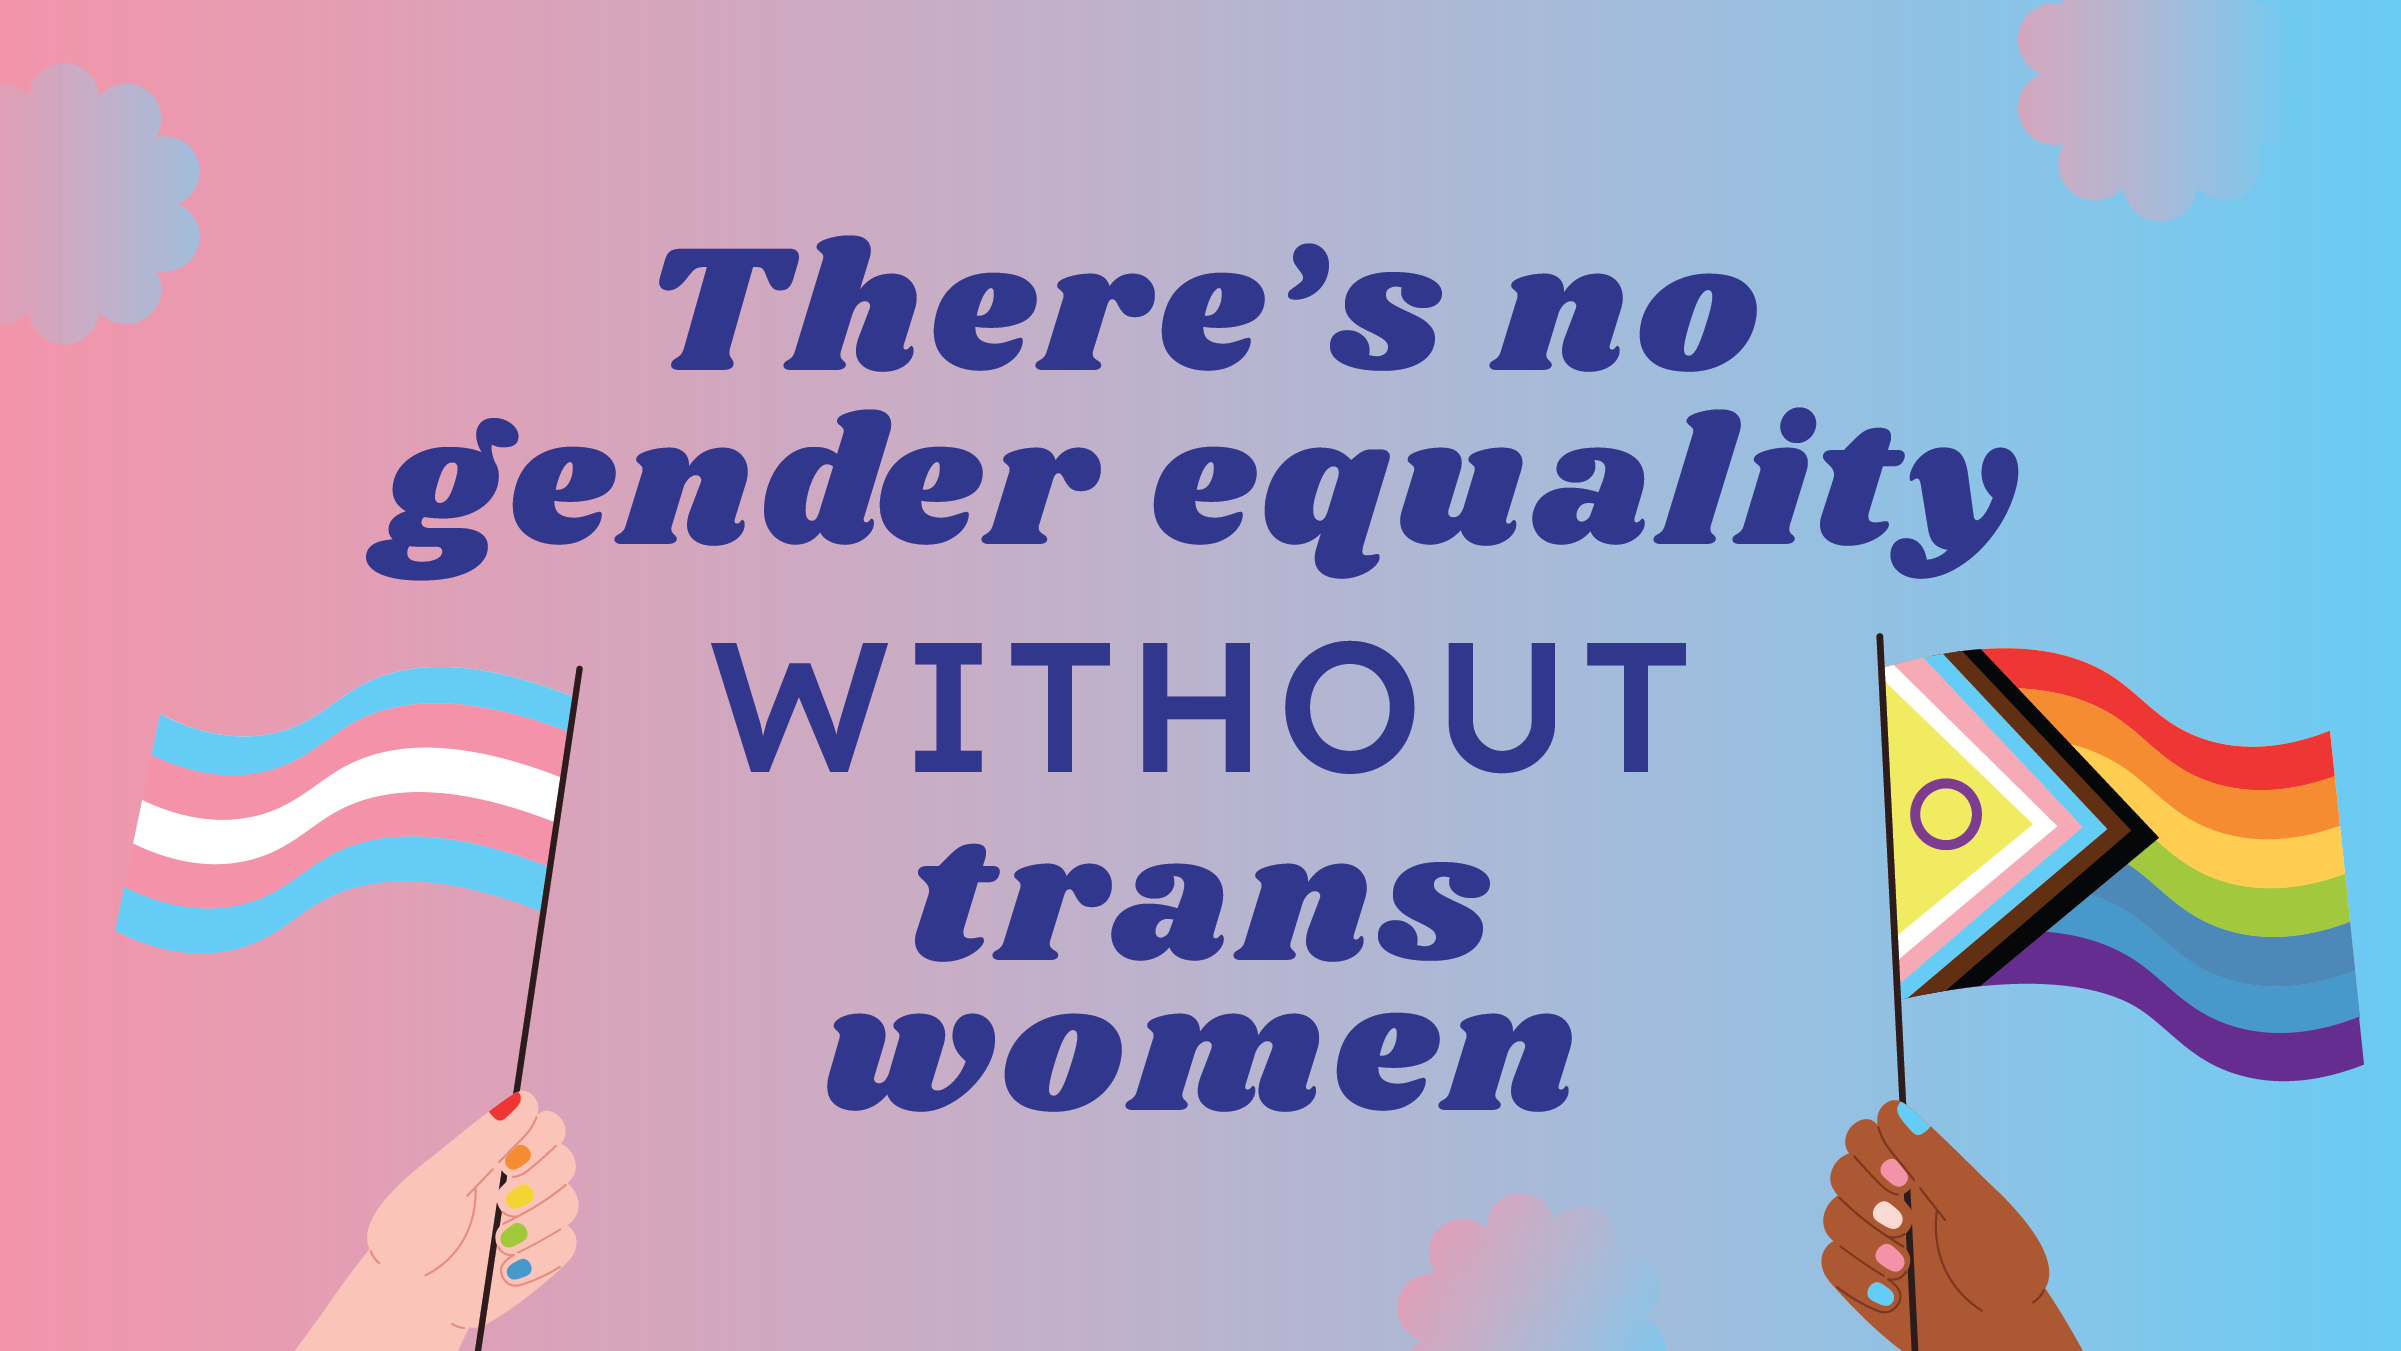 A pink-blue gradient background with the words "There's no gender equality without trans women" centred in purple in the middle. Two hands wave a trans flag and a progress flag.